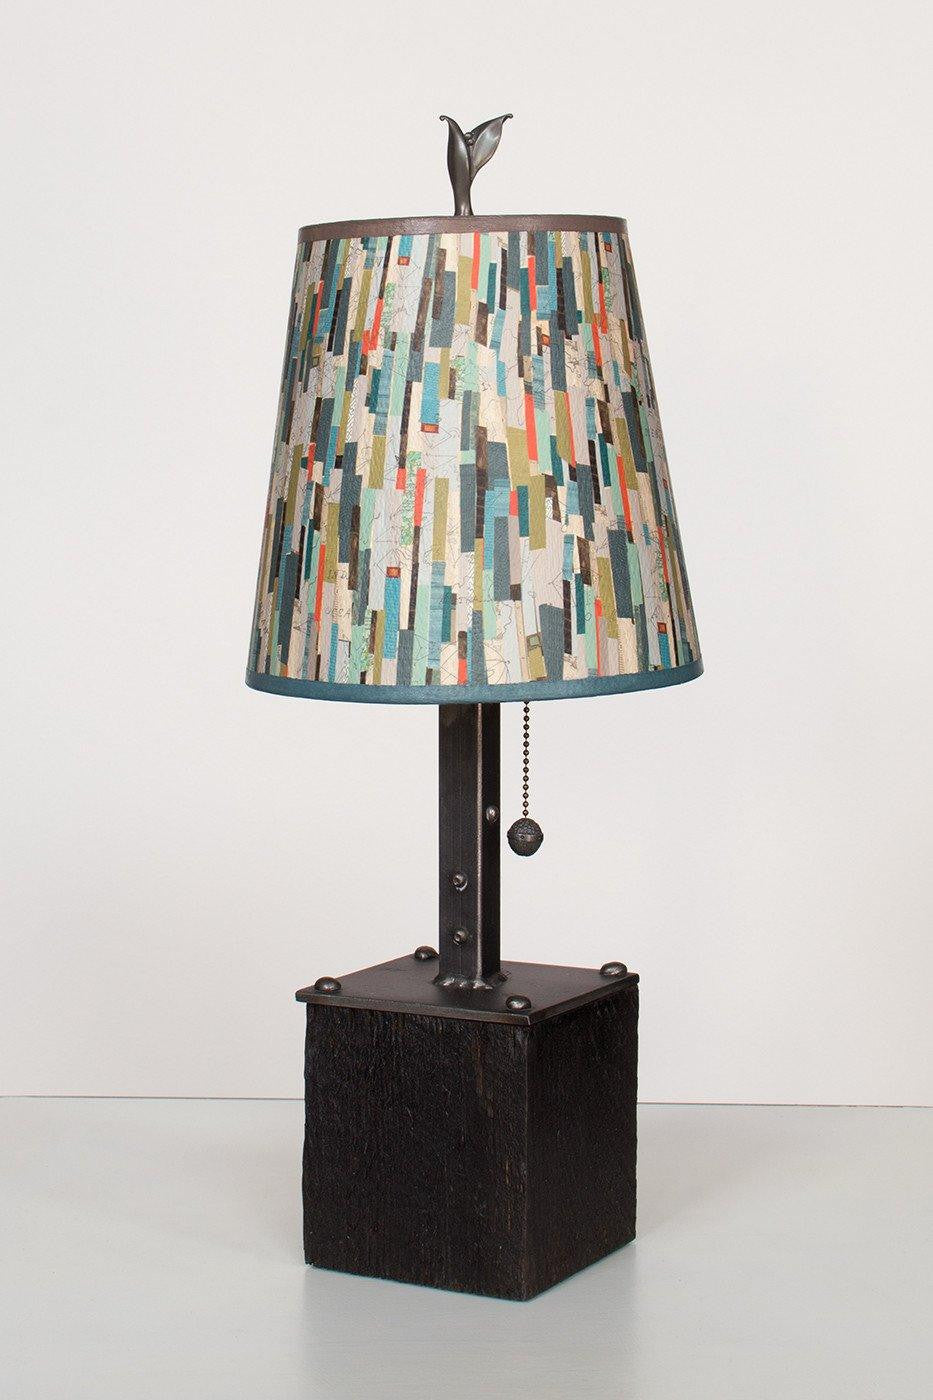 Steel Table Lamp on Reclaimed Wood with Small Drum Shade in Papers